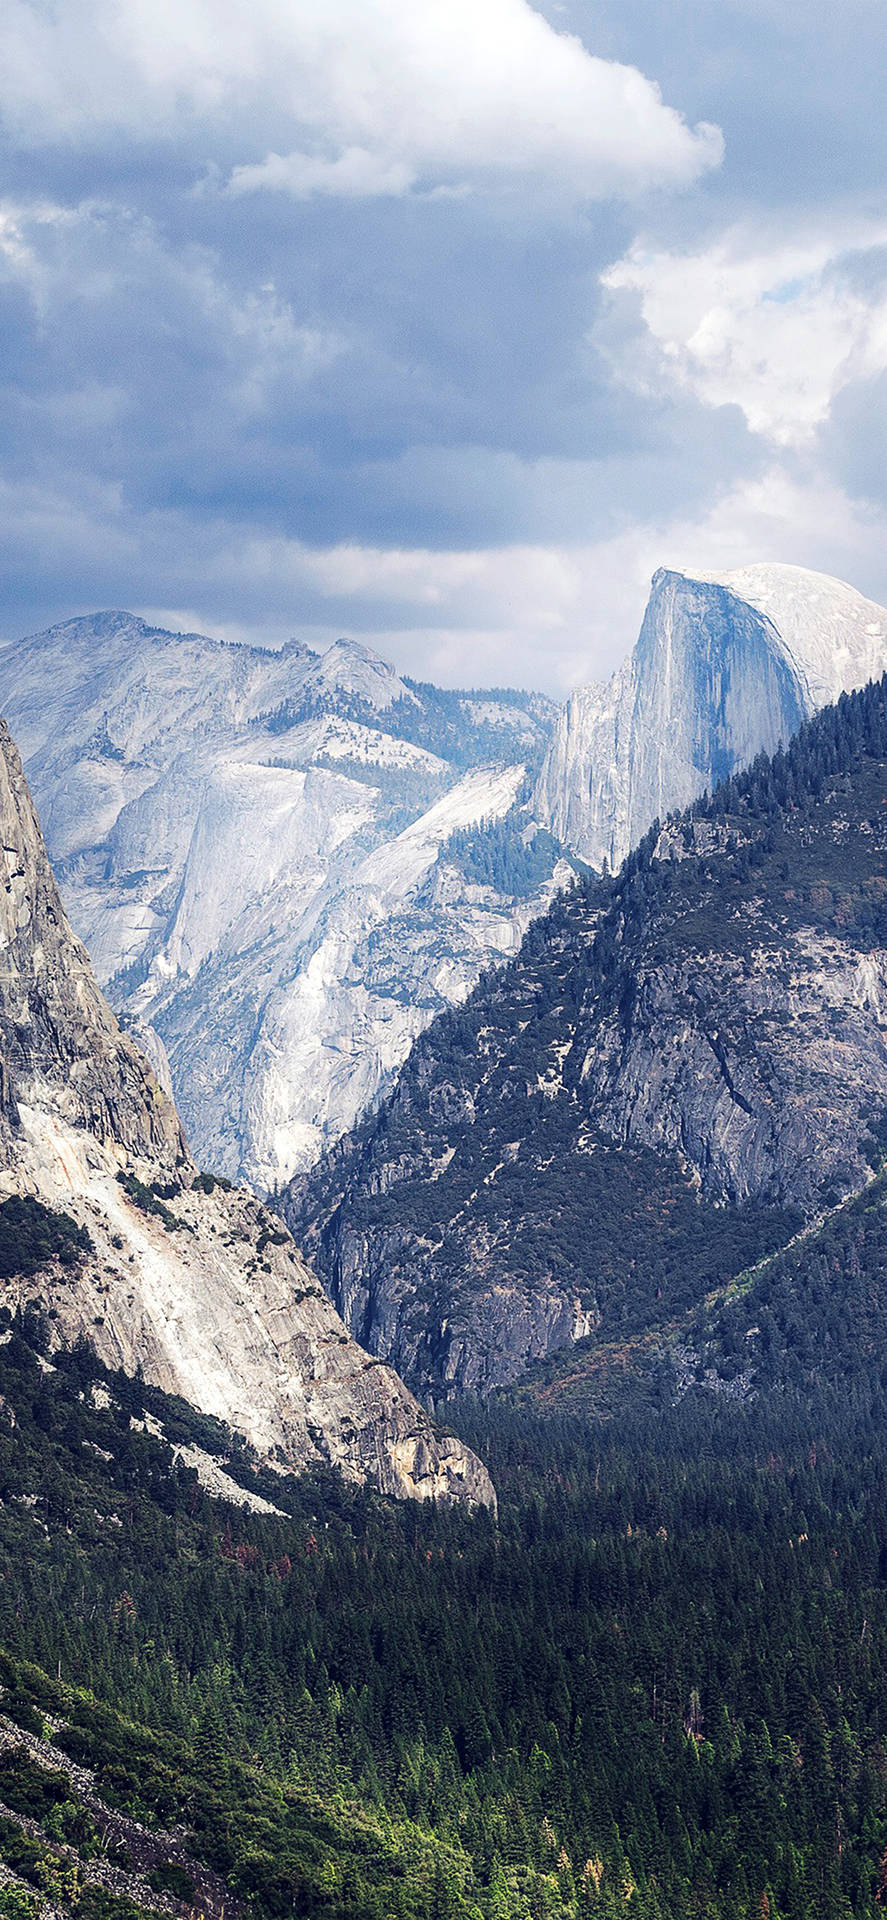 Capture the beauty of Yosemite National Park from your Iphone. Wallpaper